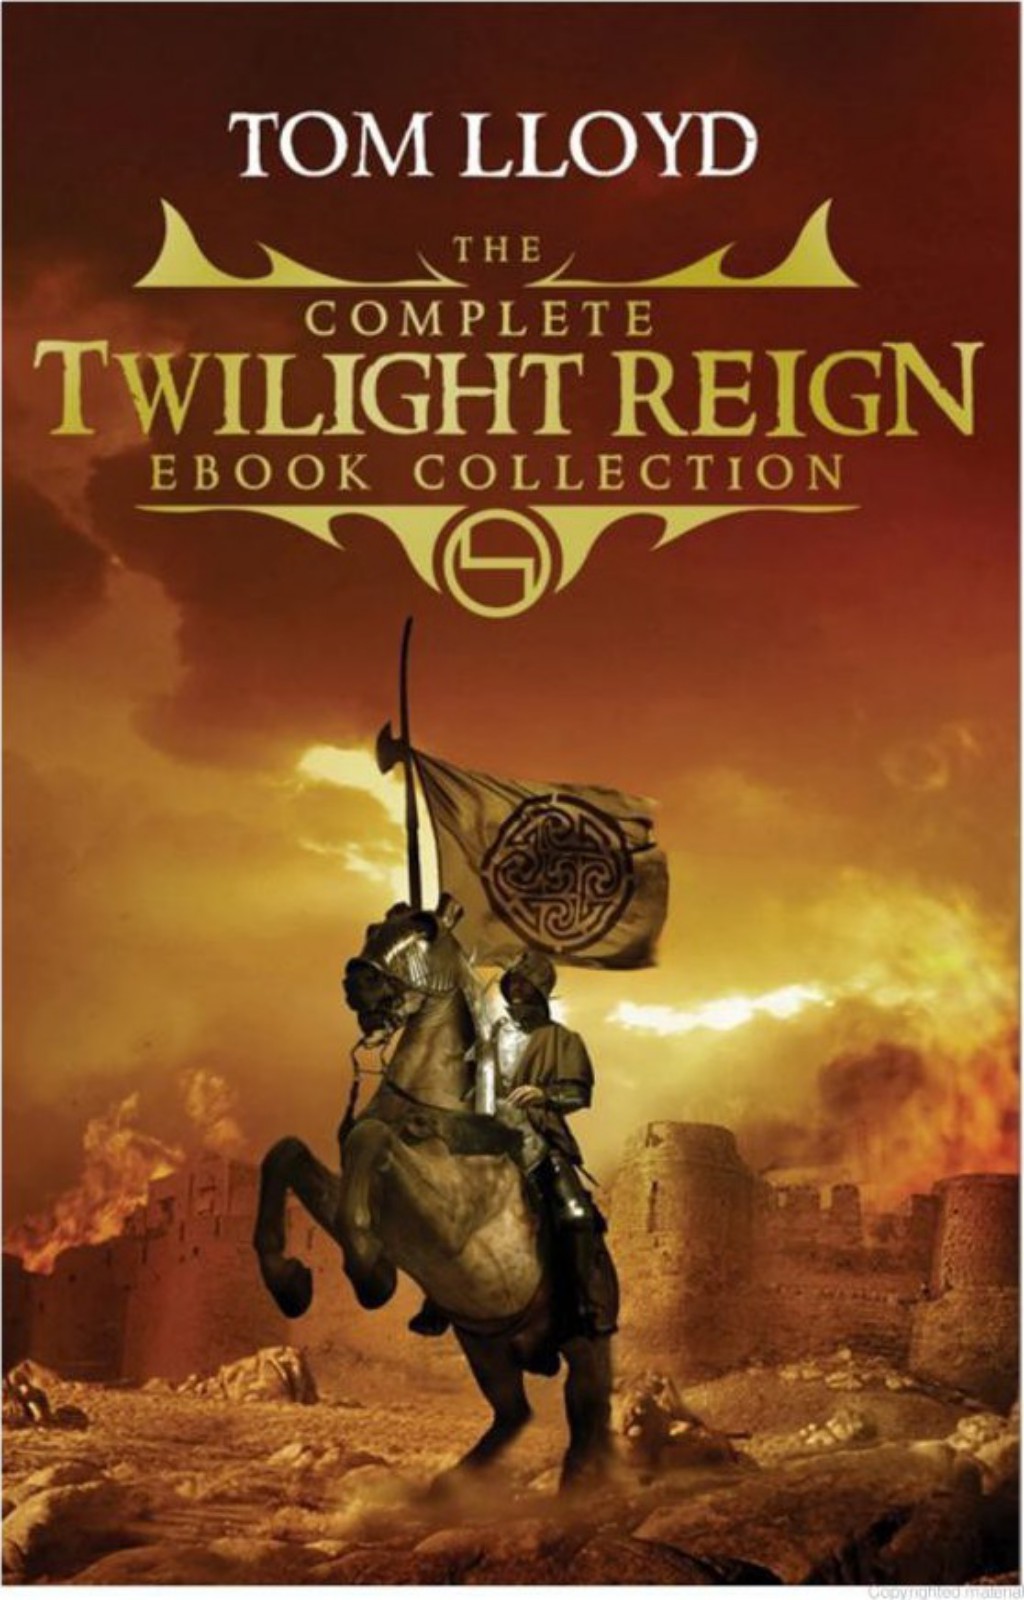 The Complete Twilight Reign Ebook Collection